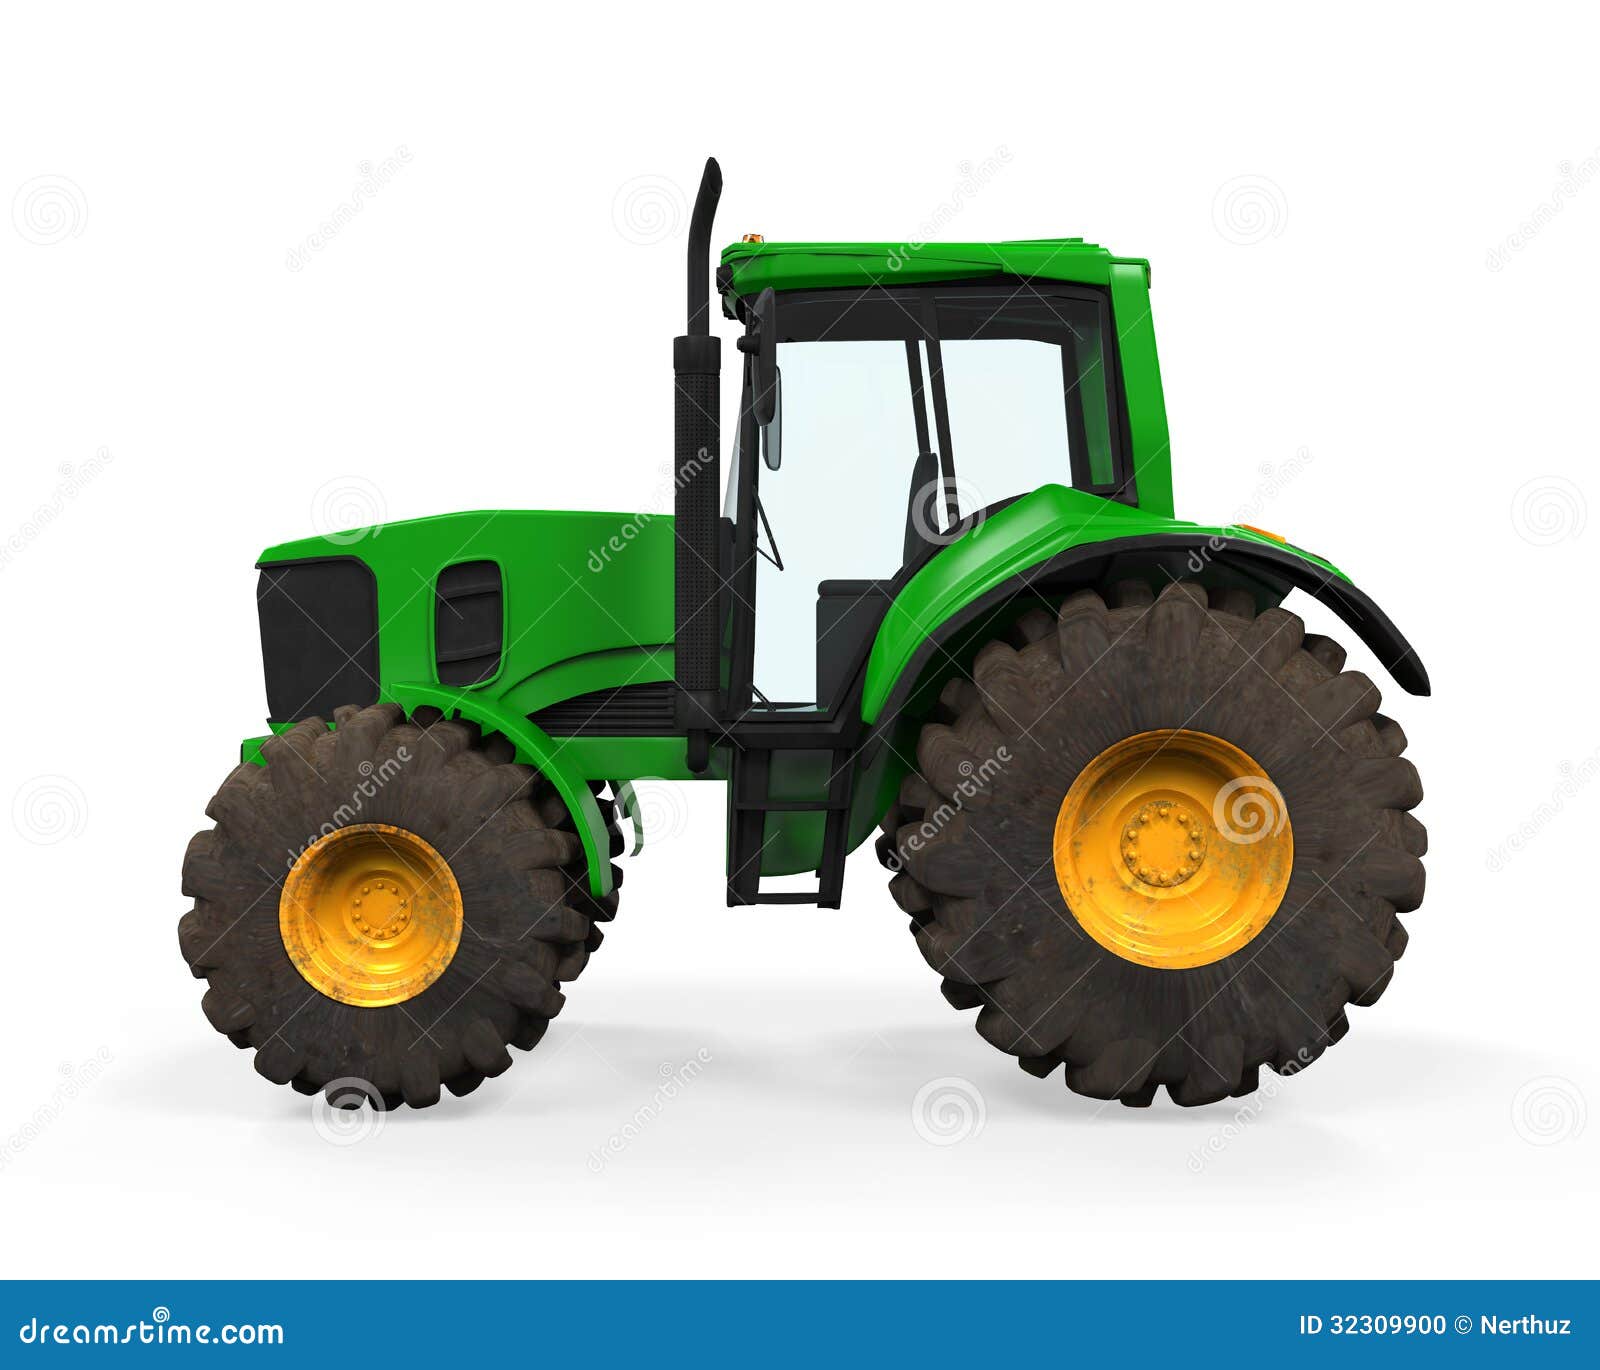 green tractor clipart - photo #28